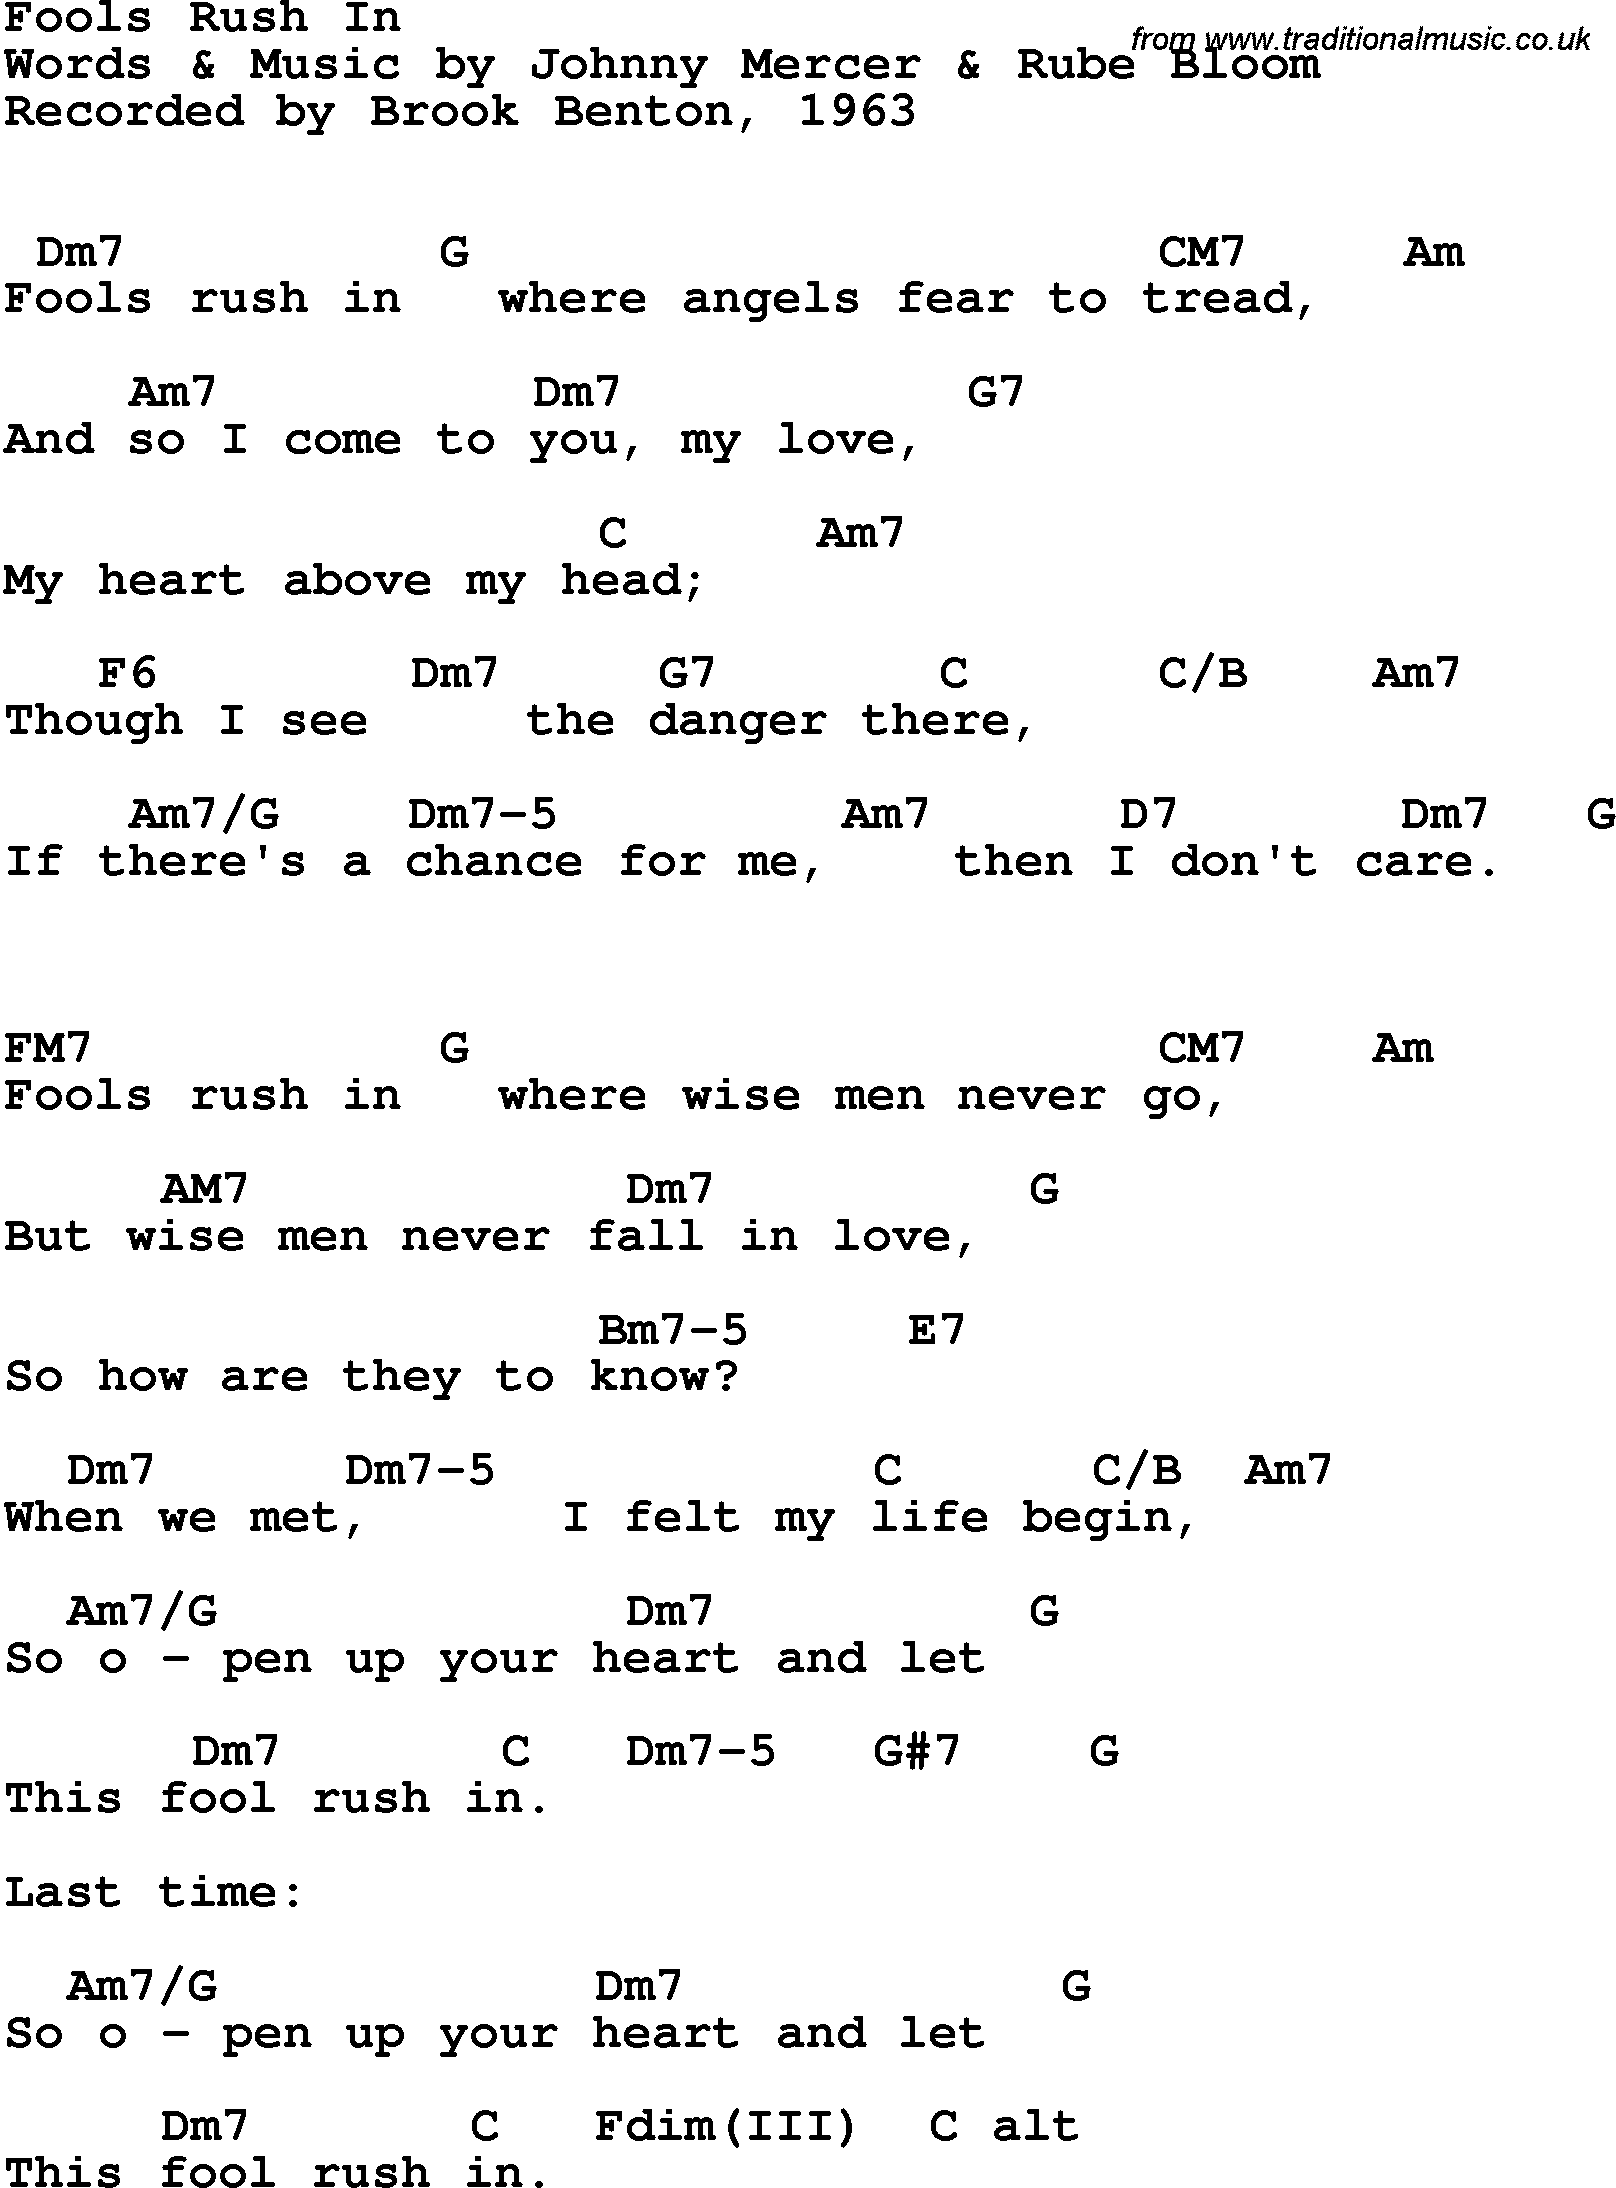 Song Lyrics with guitar chords for Fools Rush In - Brook Benton, 1963